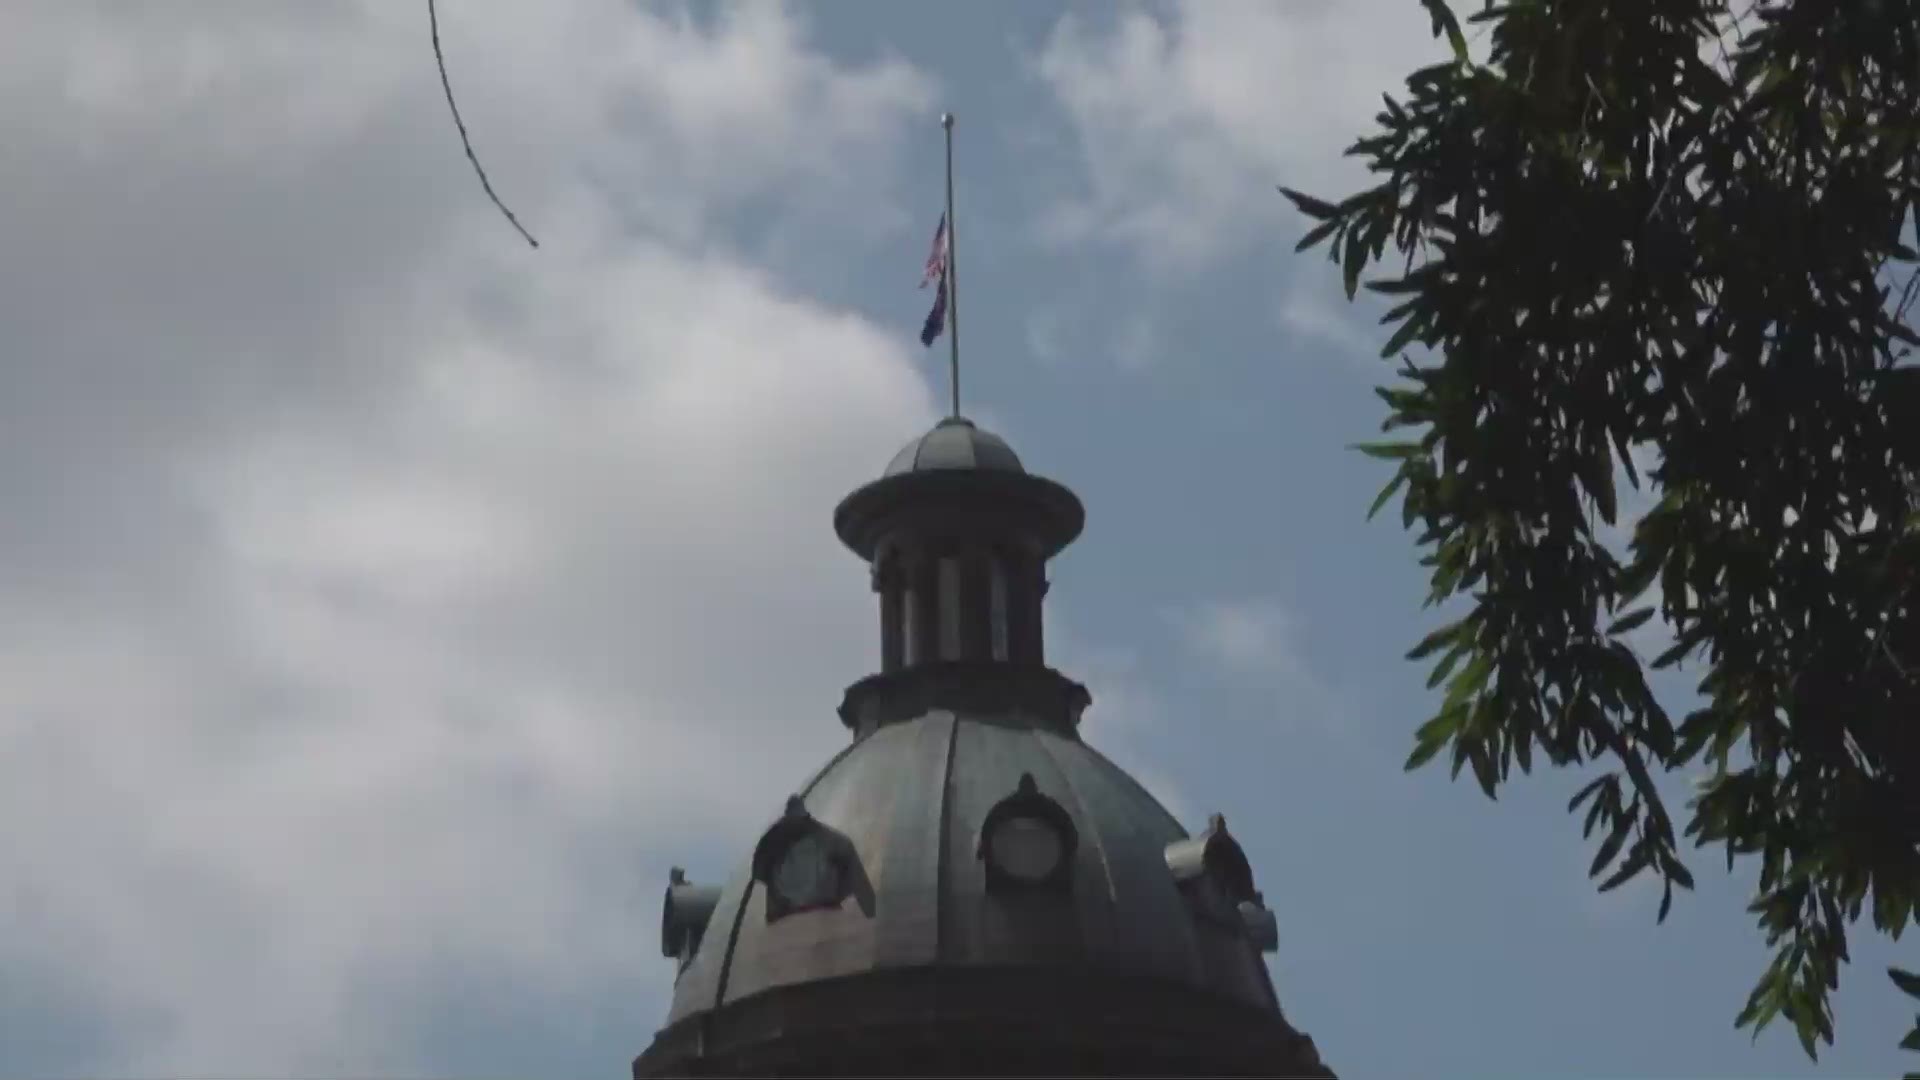 The flags atop the South Carolina State House building flew at half staff on Sunday, August 30 in honor of actor Chadwick Boseman.